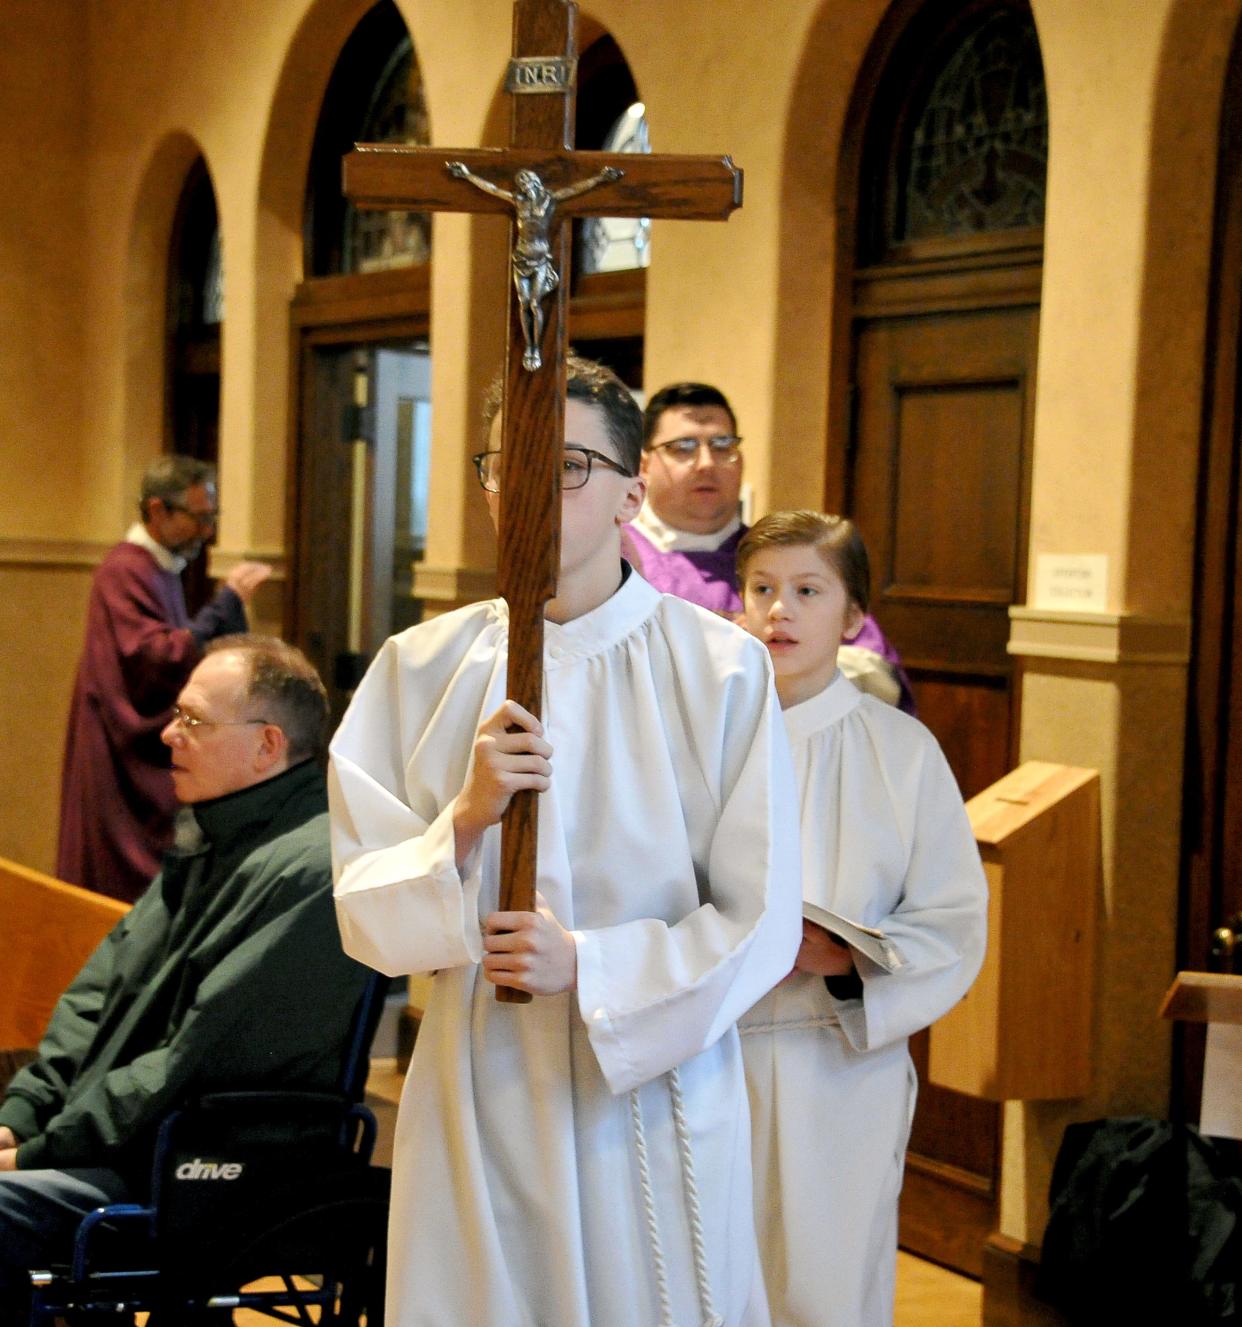 The Ash Wednesday morning service at the St. Mary of the Immaculate Conception Church in Wooster begins.